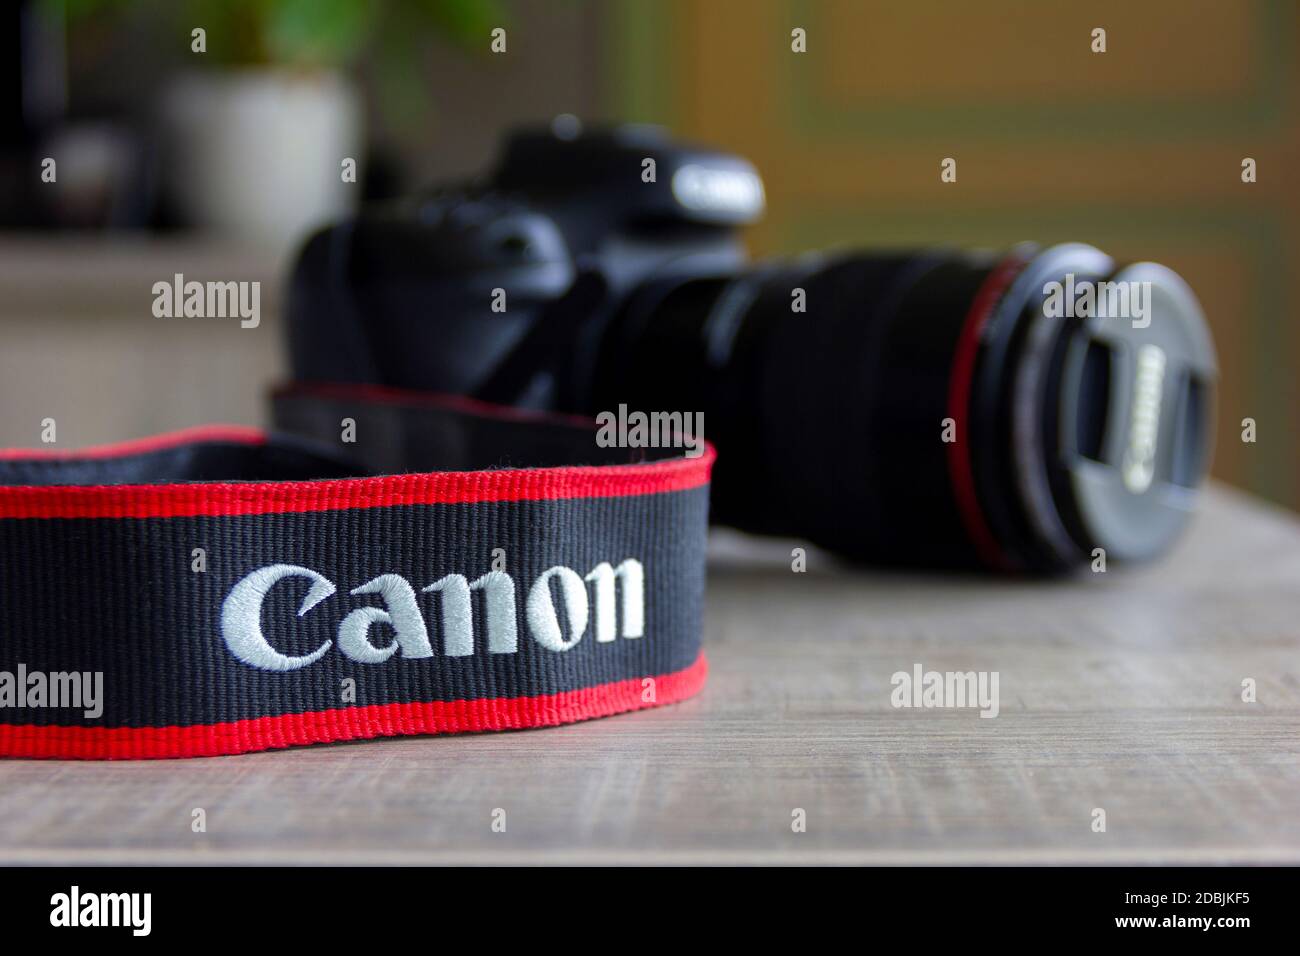 Brecht, Belgium - April 30 2020: A portrait of a blurred canon 7D mark II camera lying on a table with the strap containing the company logo in focus. Stock Photo